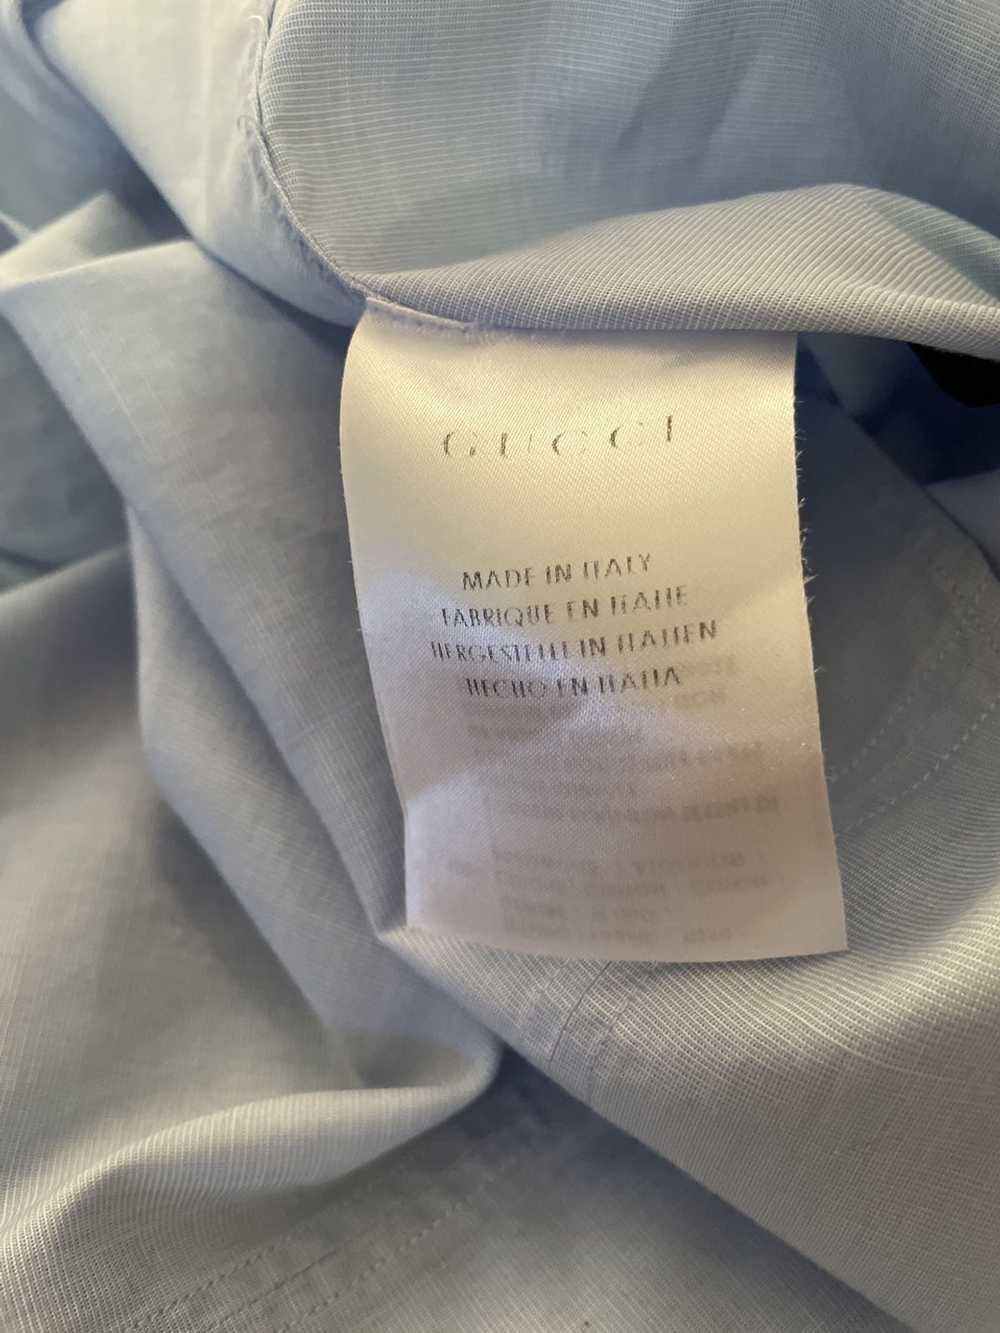 Gucci Gucci Shirt in Light Blue - image 4